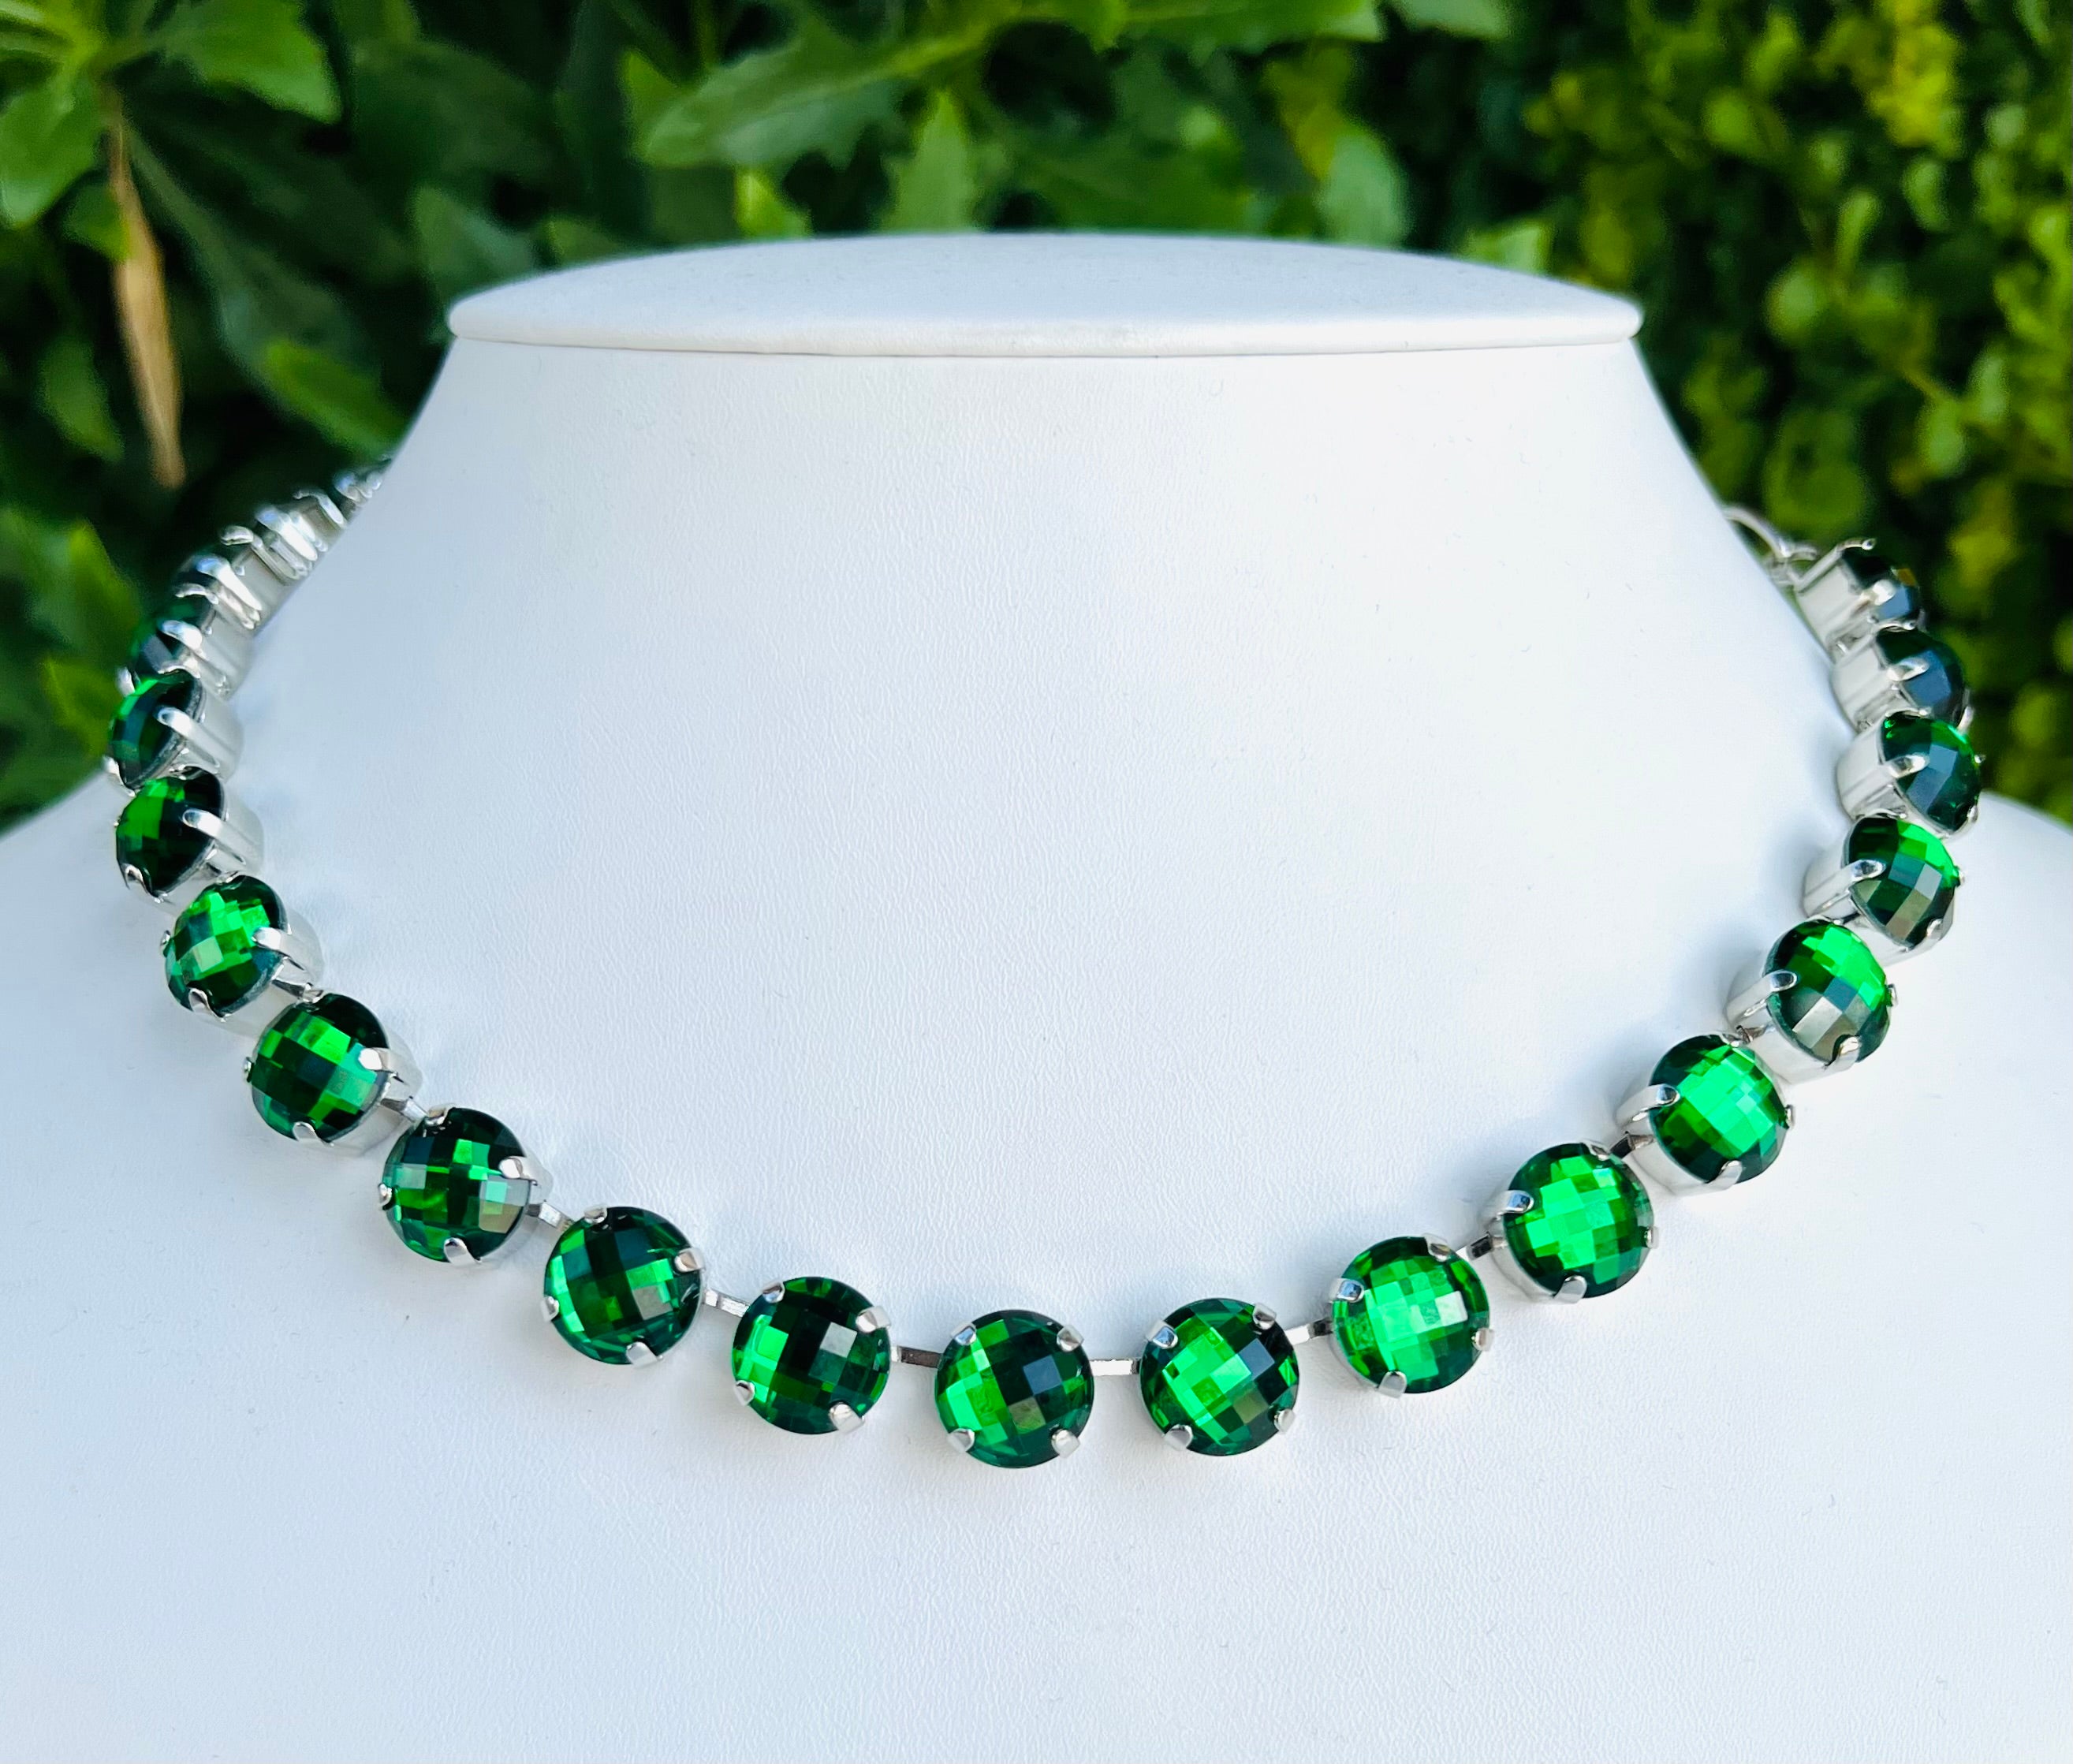 Mariana Silver Large Round Crystal Necklace in "Emerald Green"